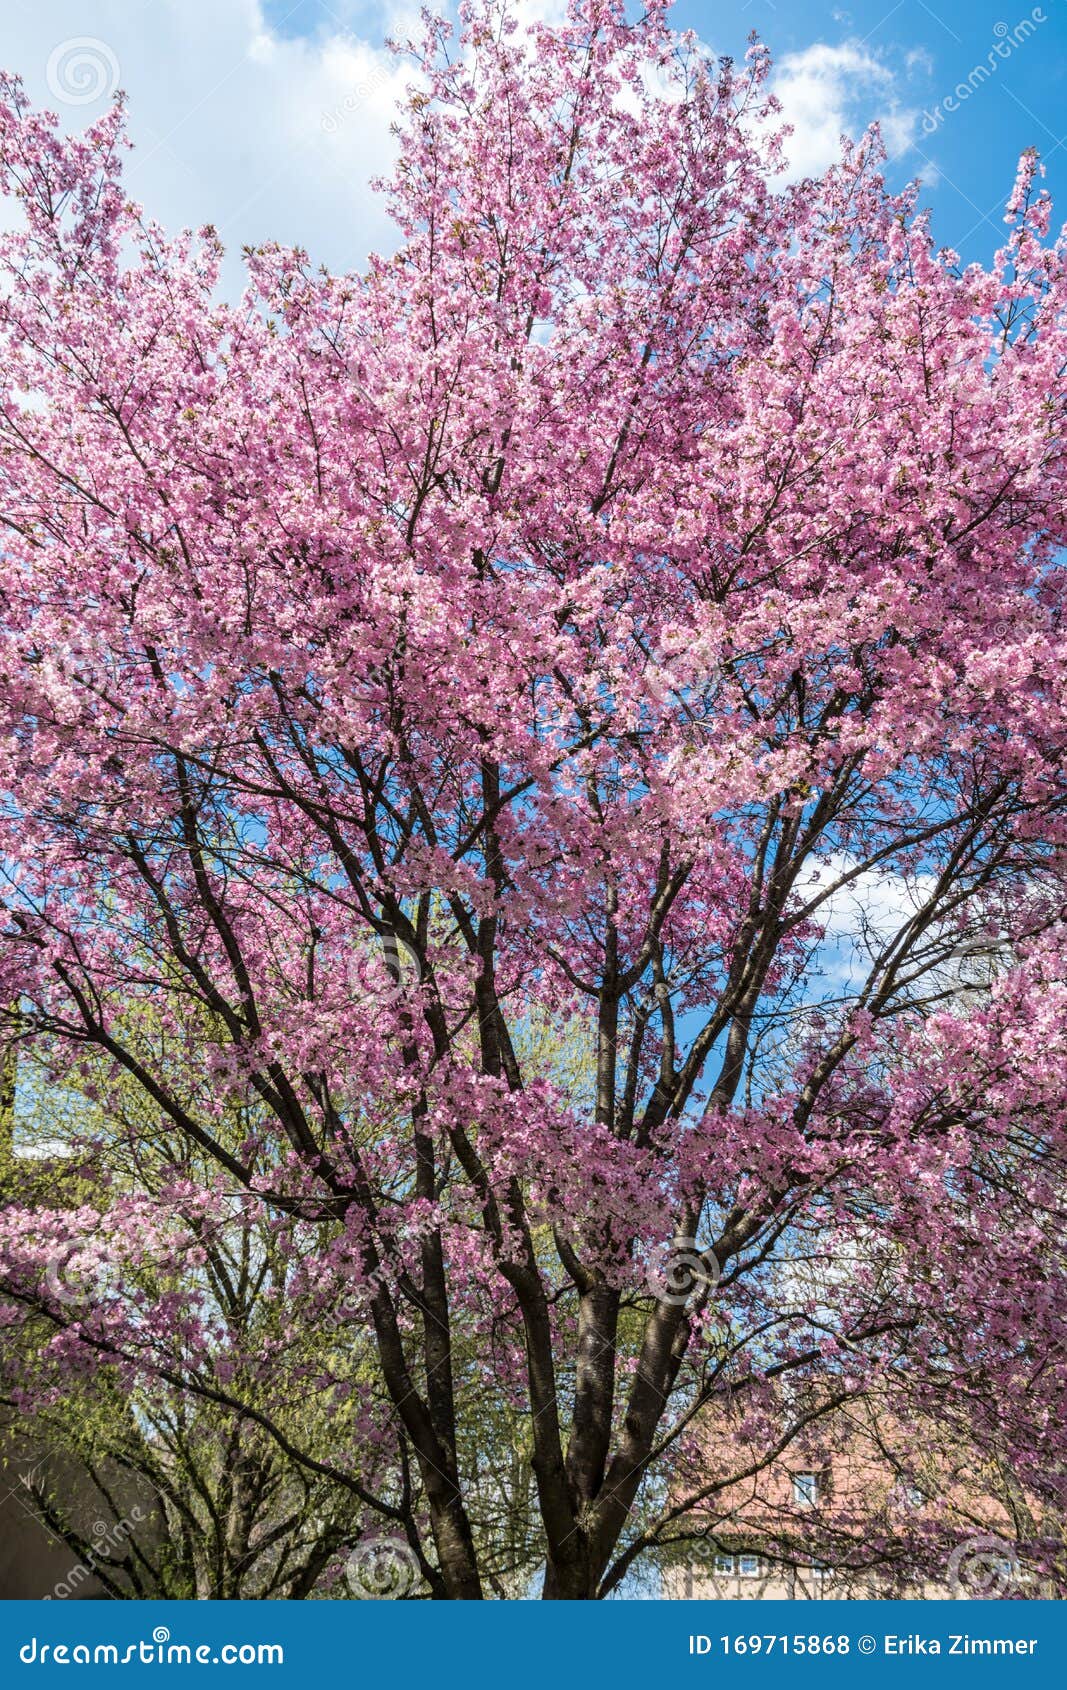 beautifully flowered tree with pink flowers